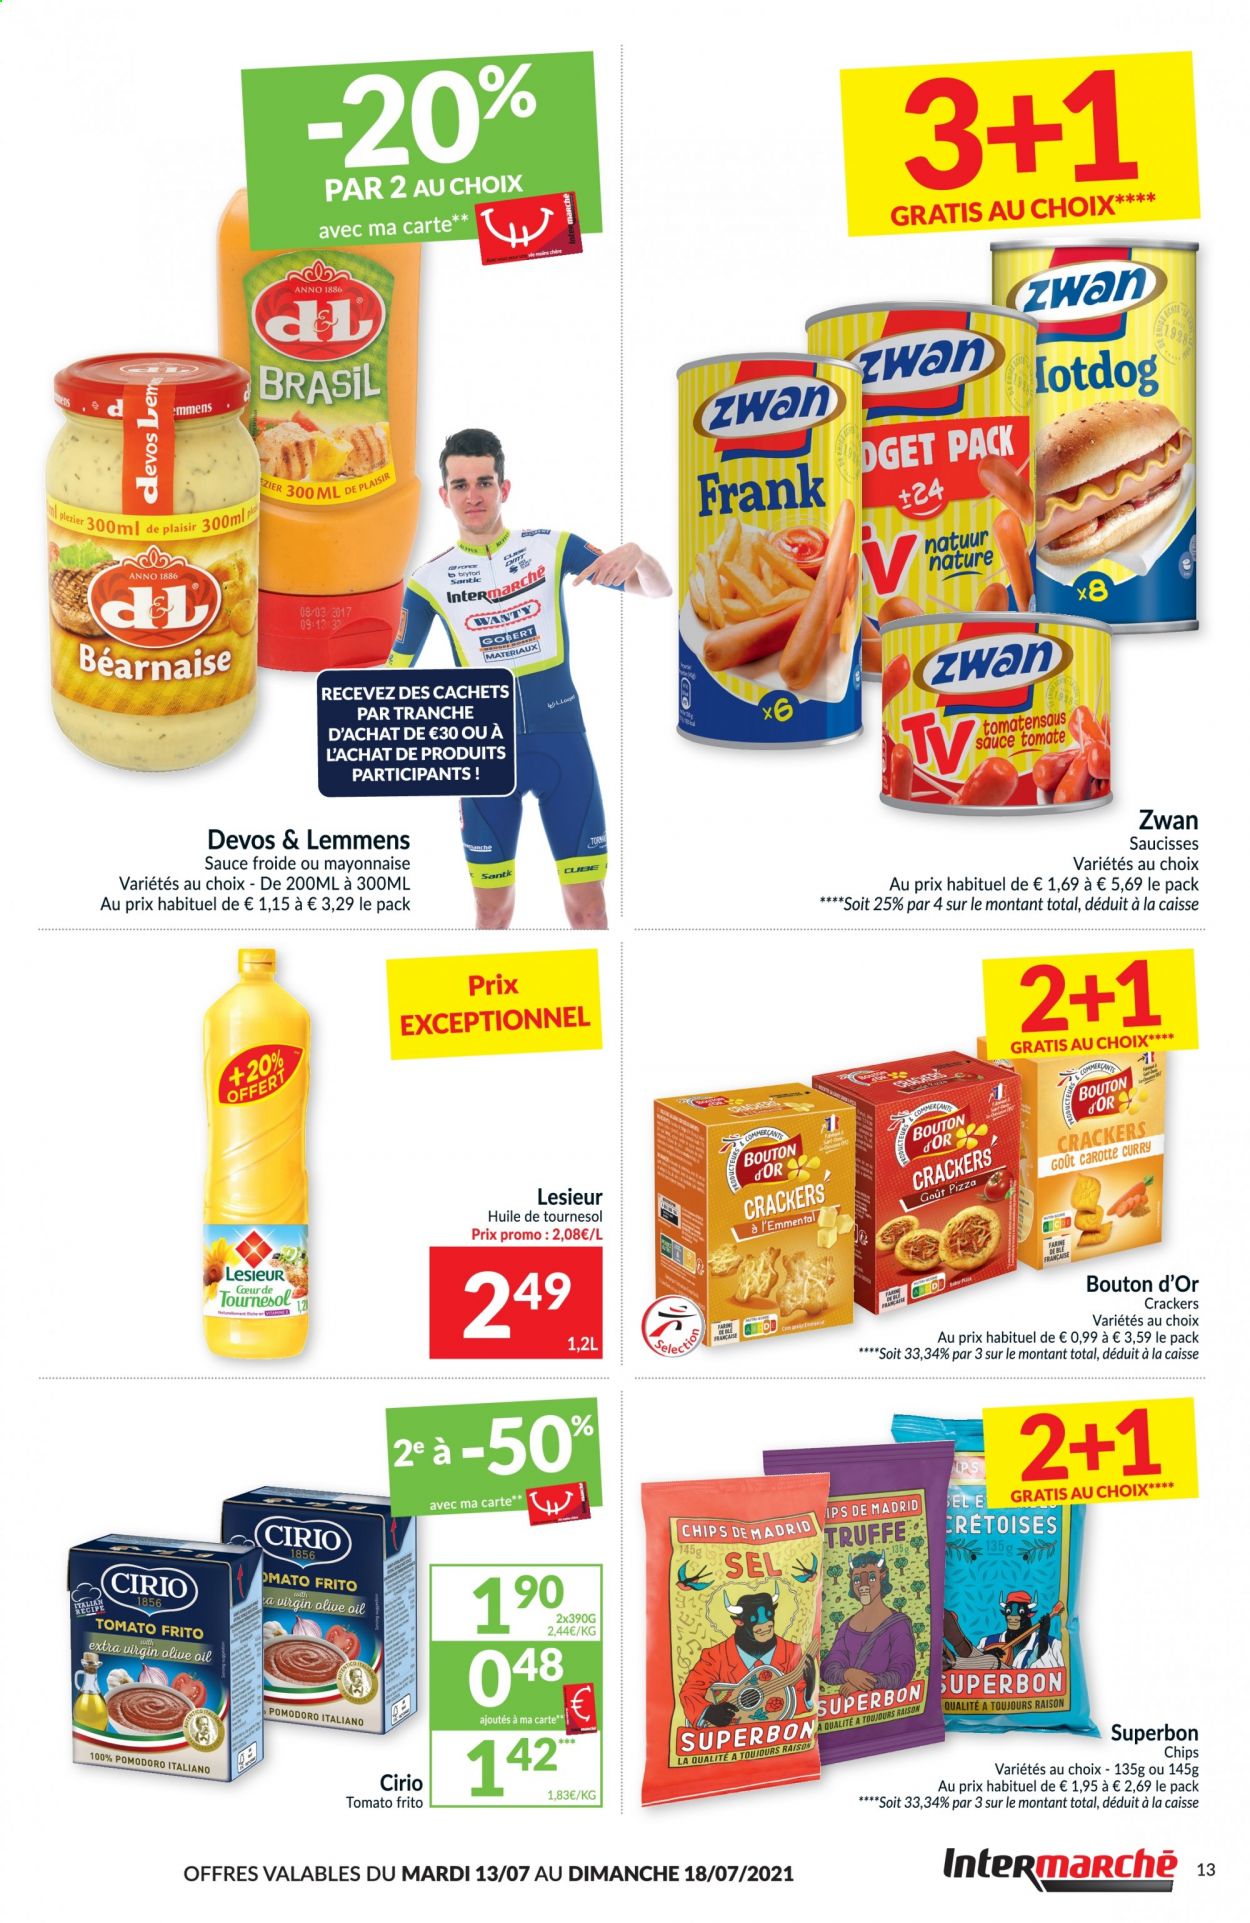 thumbnail - Intermarché-aanbieding - 13/07/2021 - 18/07/2021 -  producten in de aanbieding - tomatensaus, tomato frito, curry, chips, pizza, Emmental, Fa. Pagina 13.